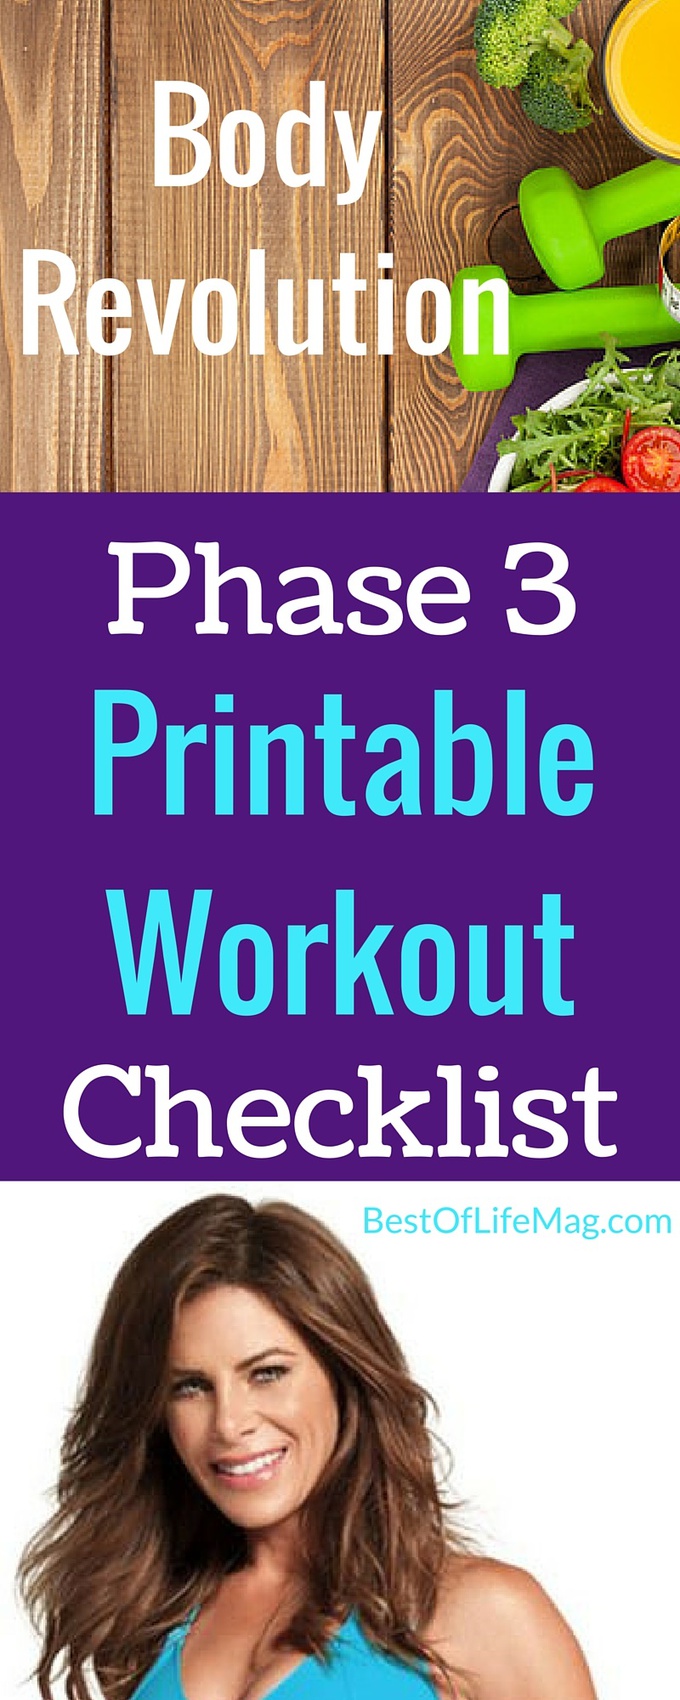 This Jillian Michaels Body Revolution Phase 3 Printable Workout Checklist will help anyone get in shape regardless of fitness level. Print and be prepared to lose weight as Jillian whips you into shape. via @amybarseghian